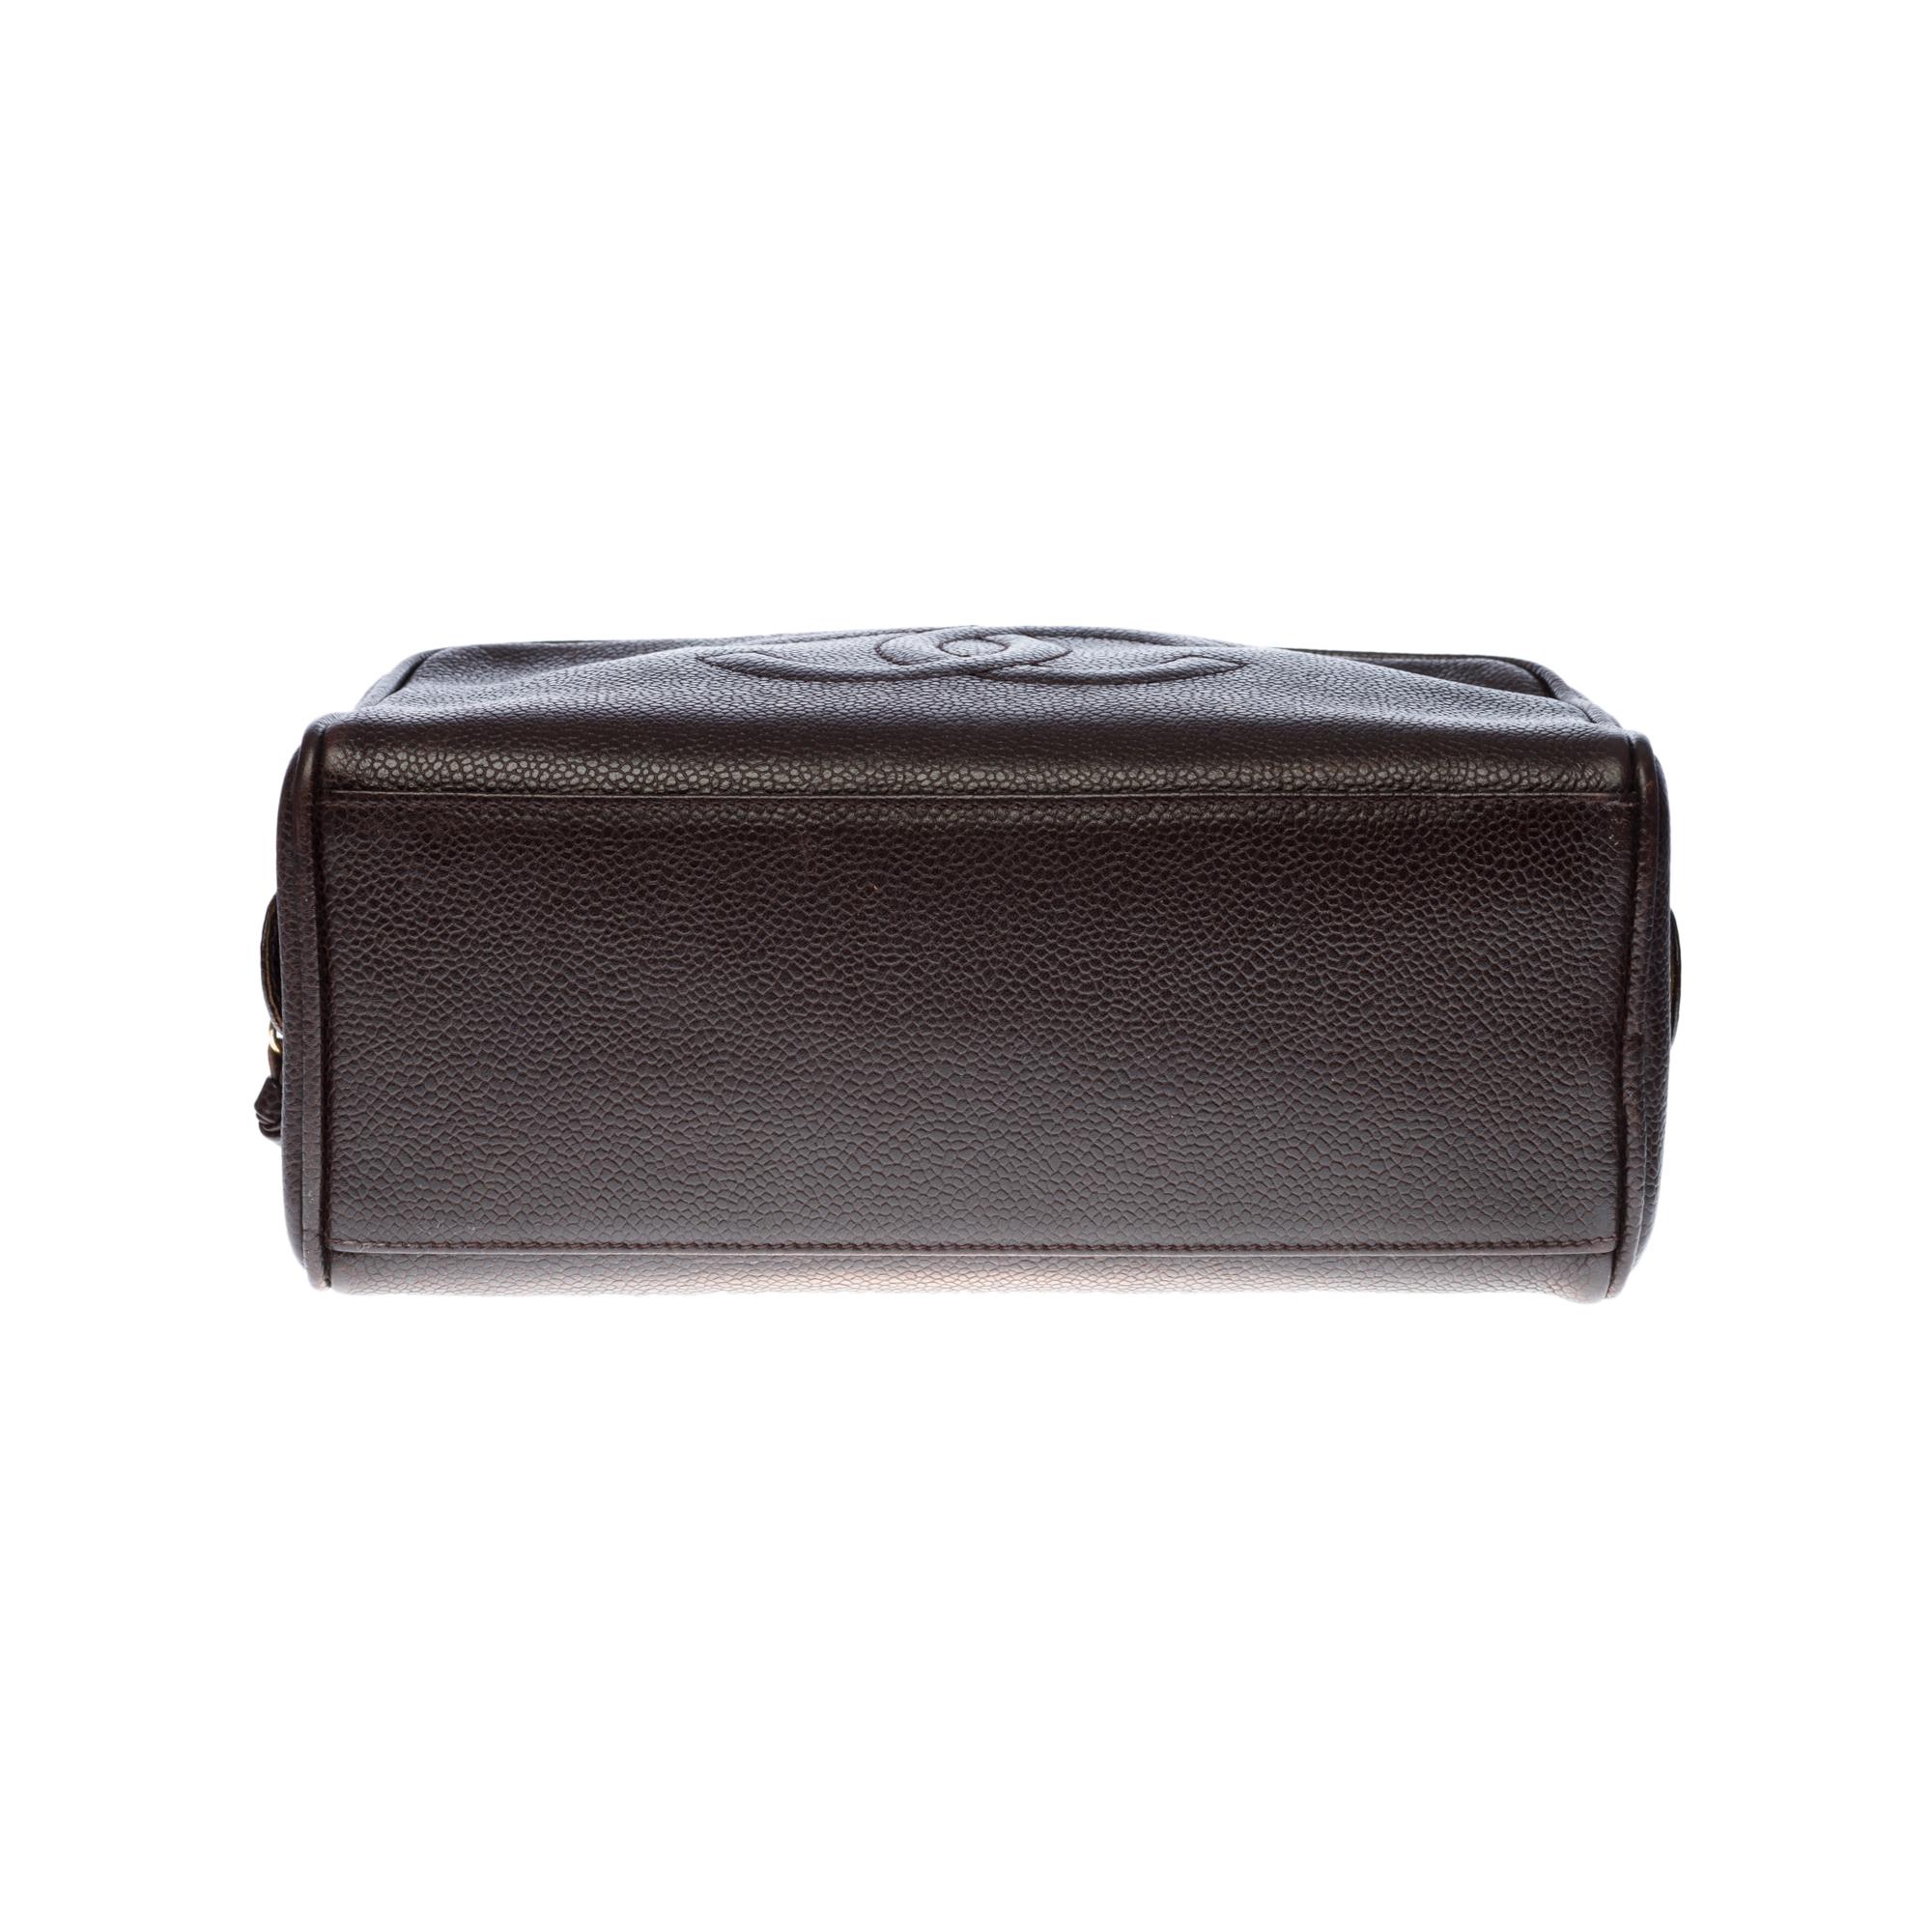 Charming Chanel CC Toilet bag in brown caviar leather For Sale 3